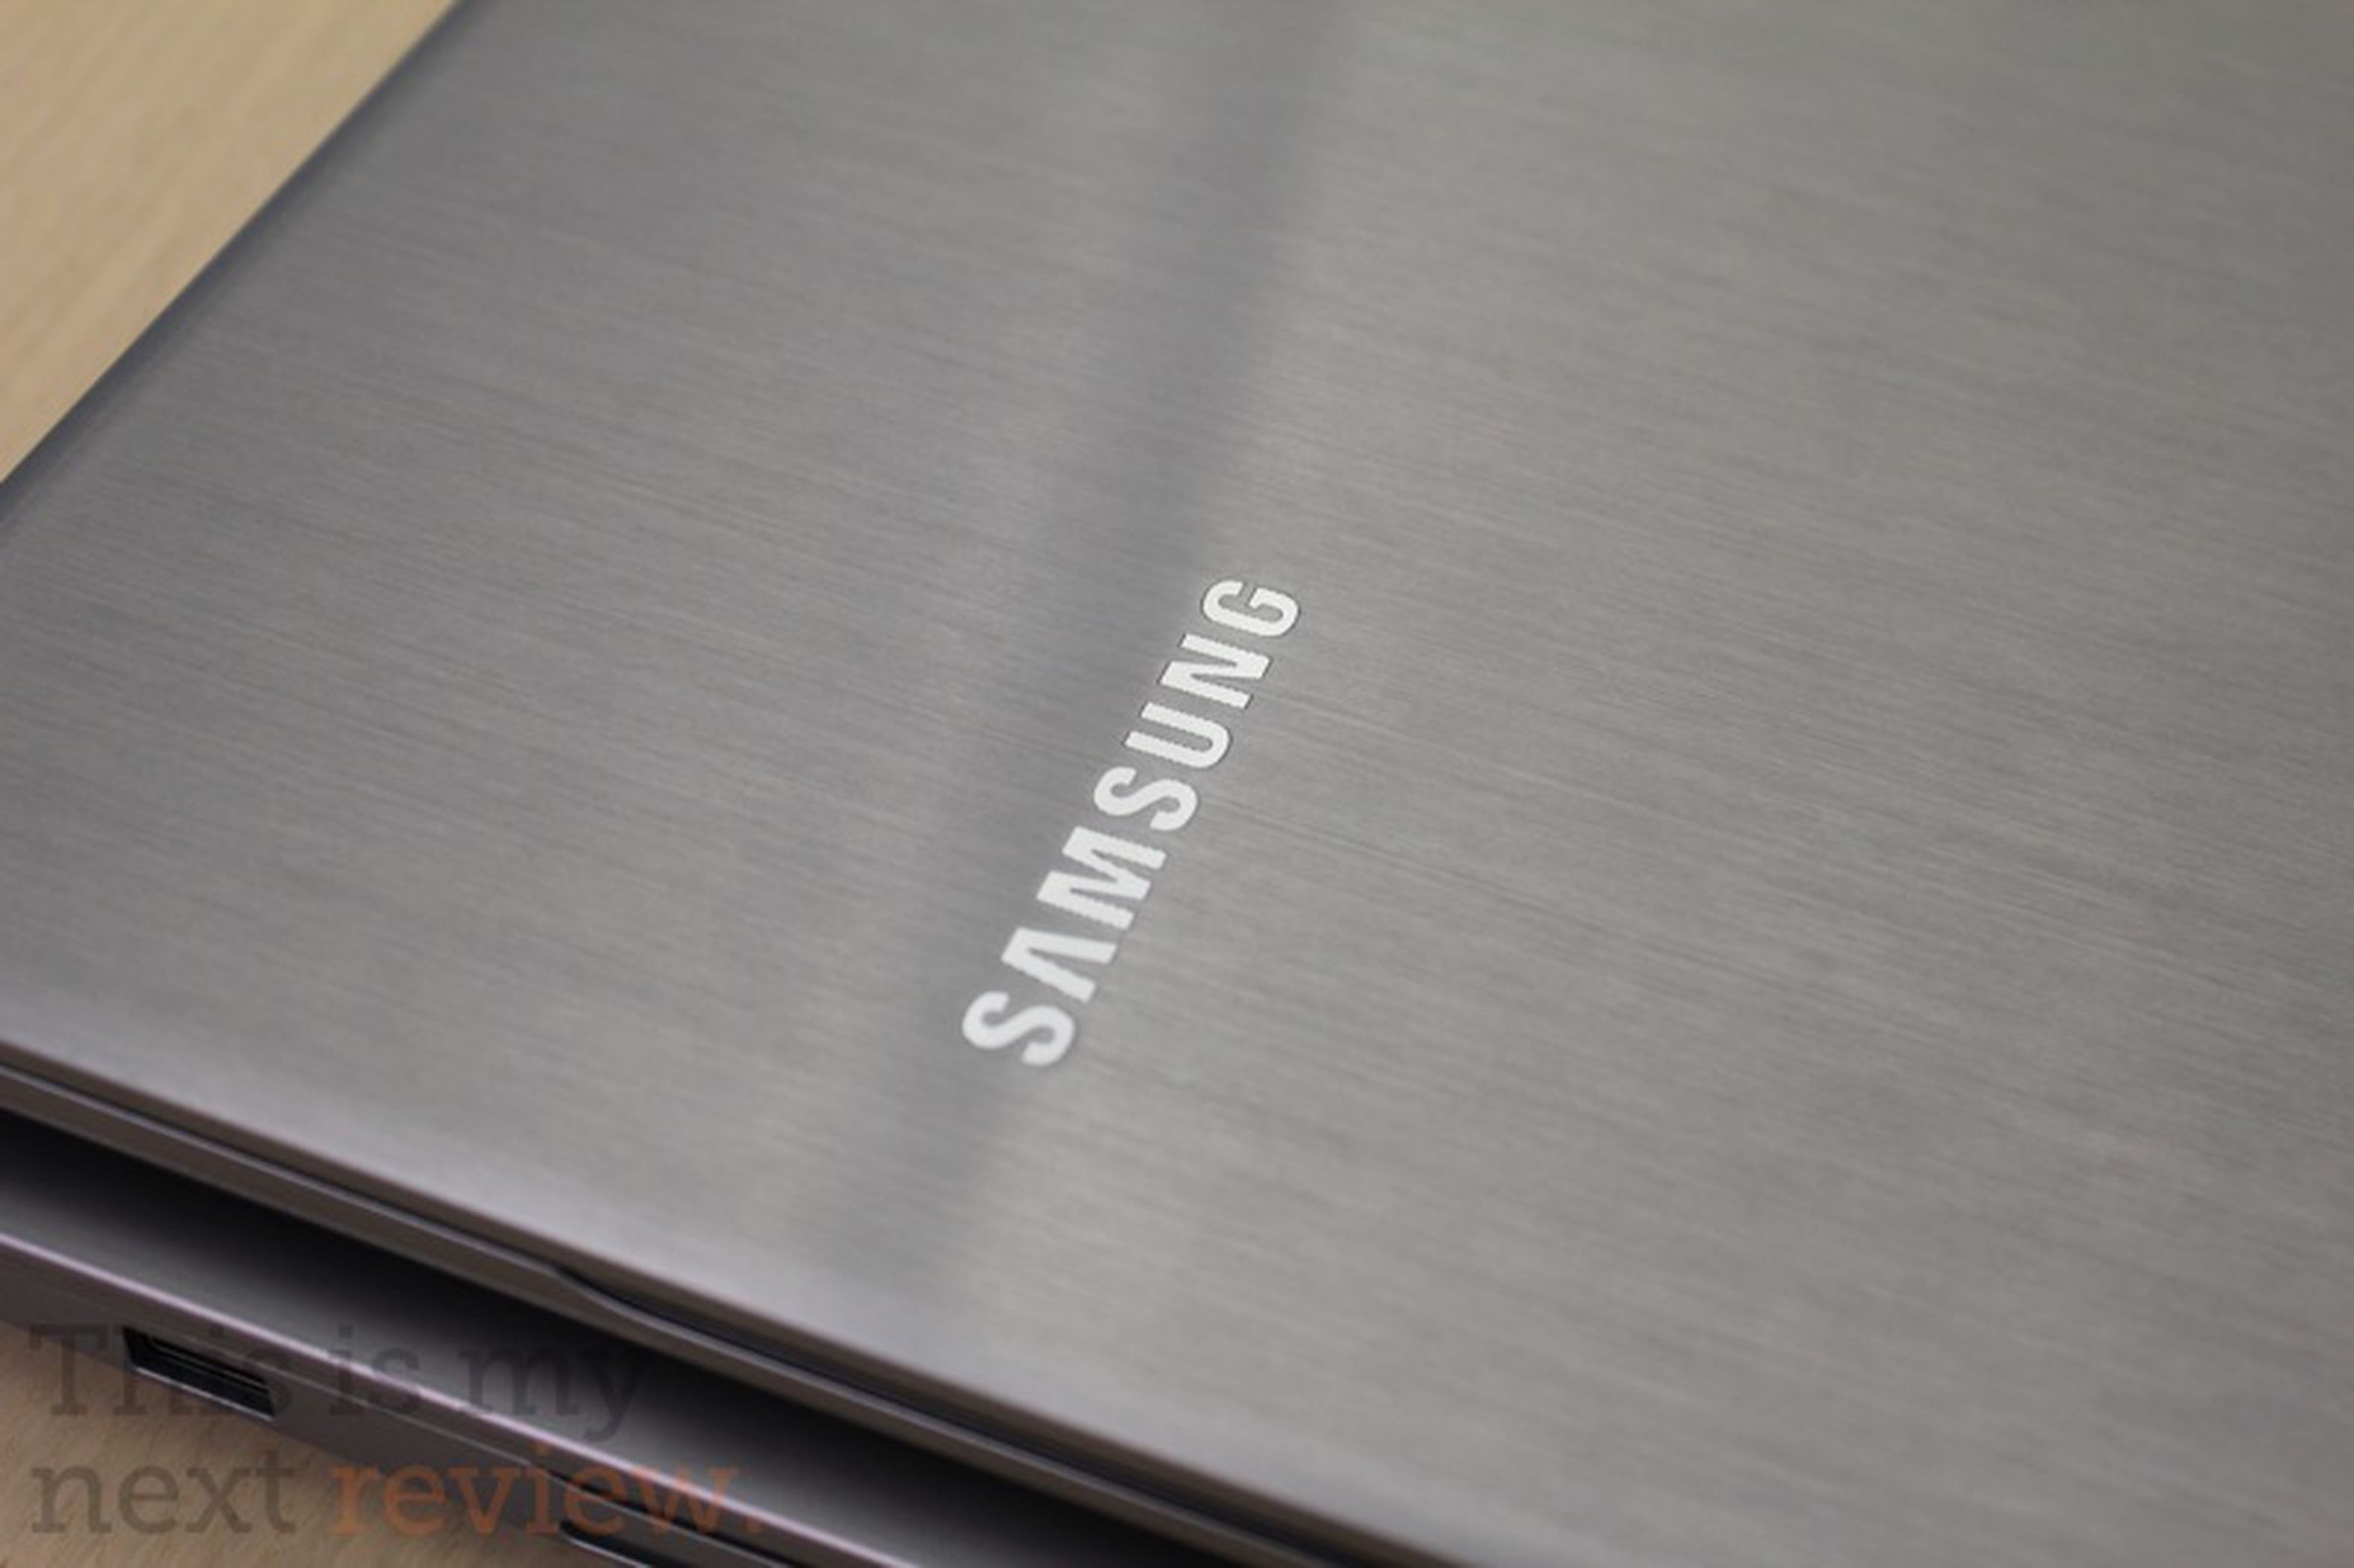 Samsung Series 7: aluminum covers, quad-core Core i7 power, and AMD graphics starting at $999